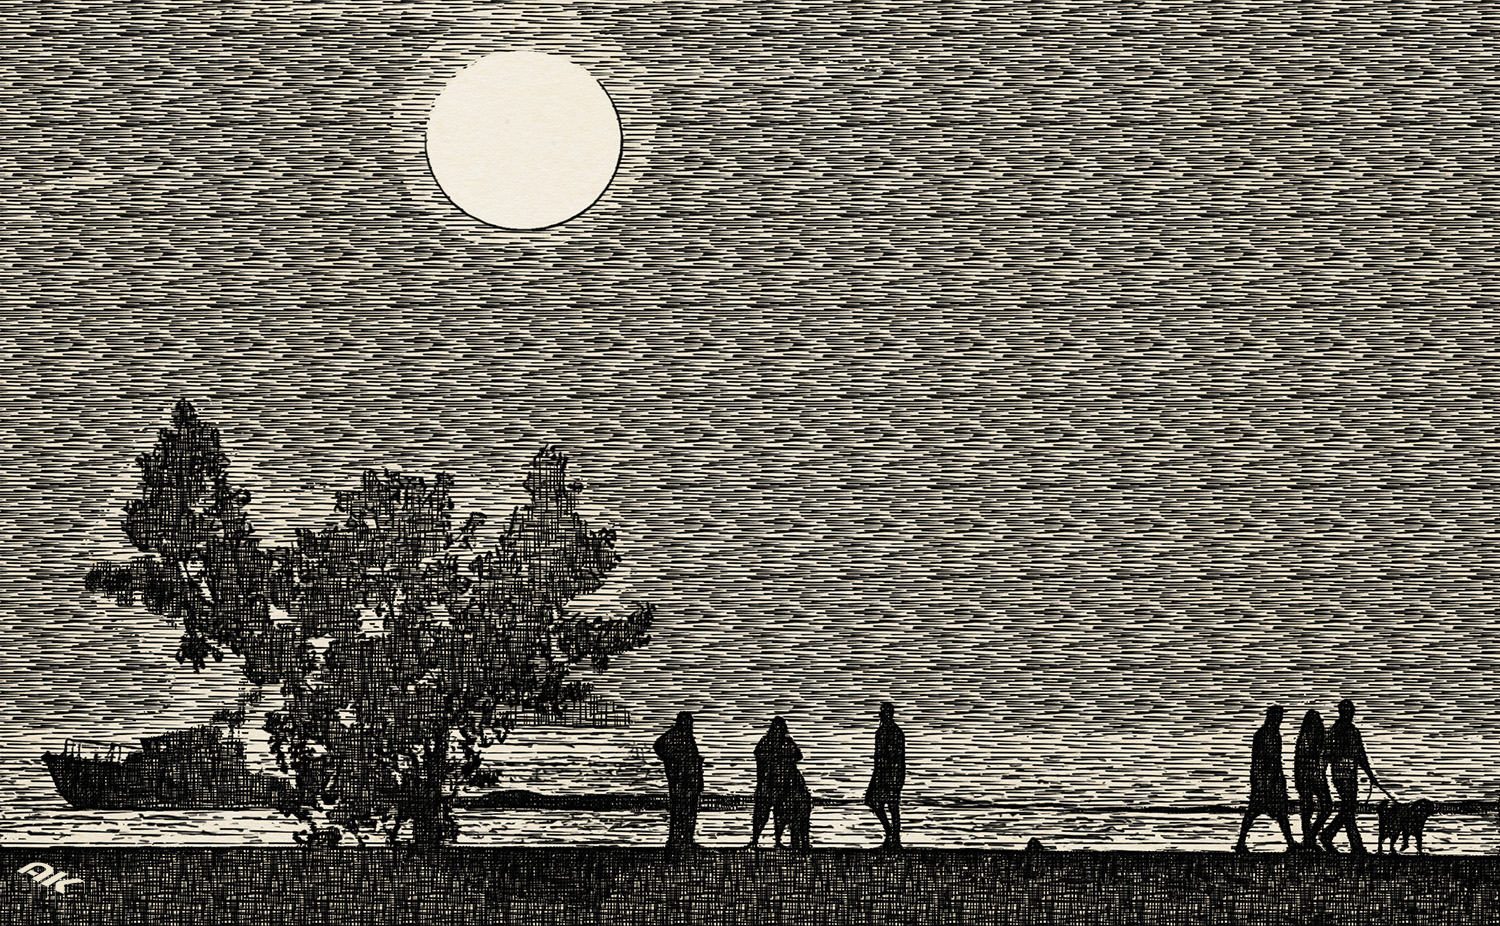 Silhouettes-Engraving-5-copyright-andrew-knutt